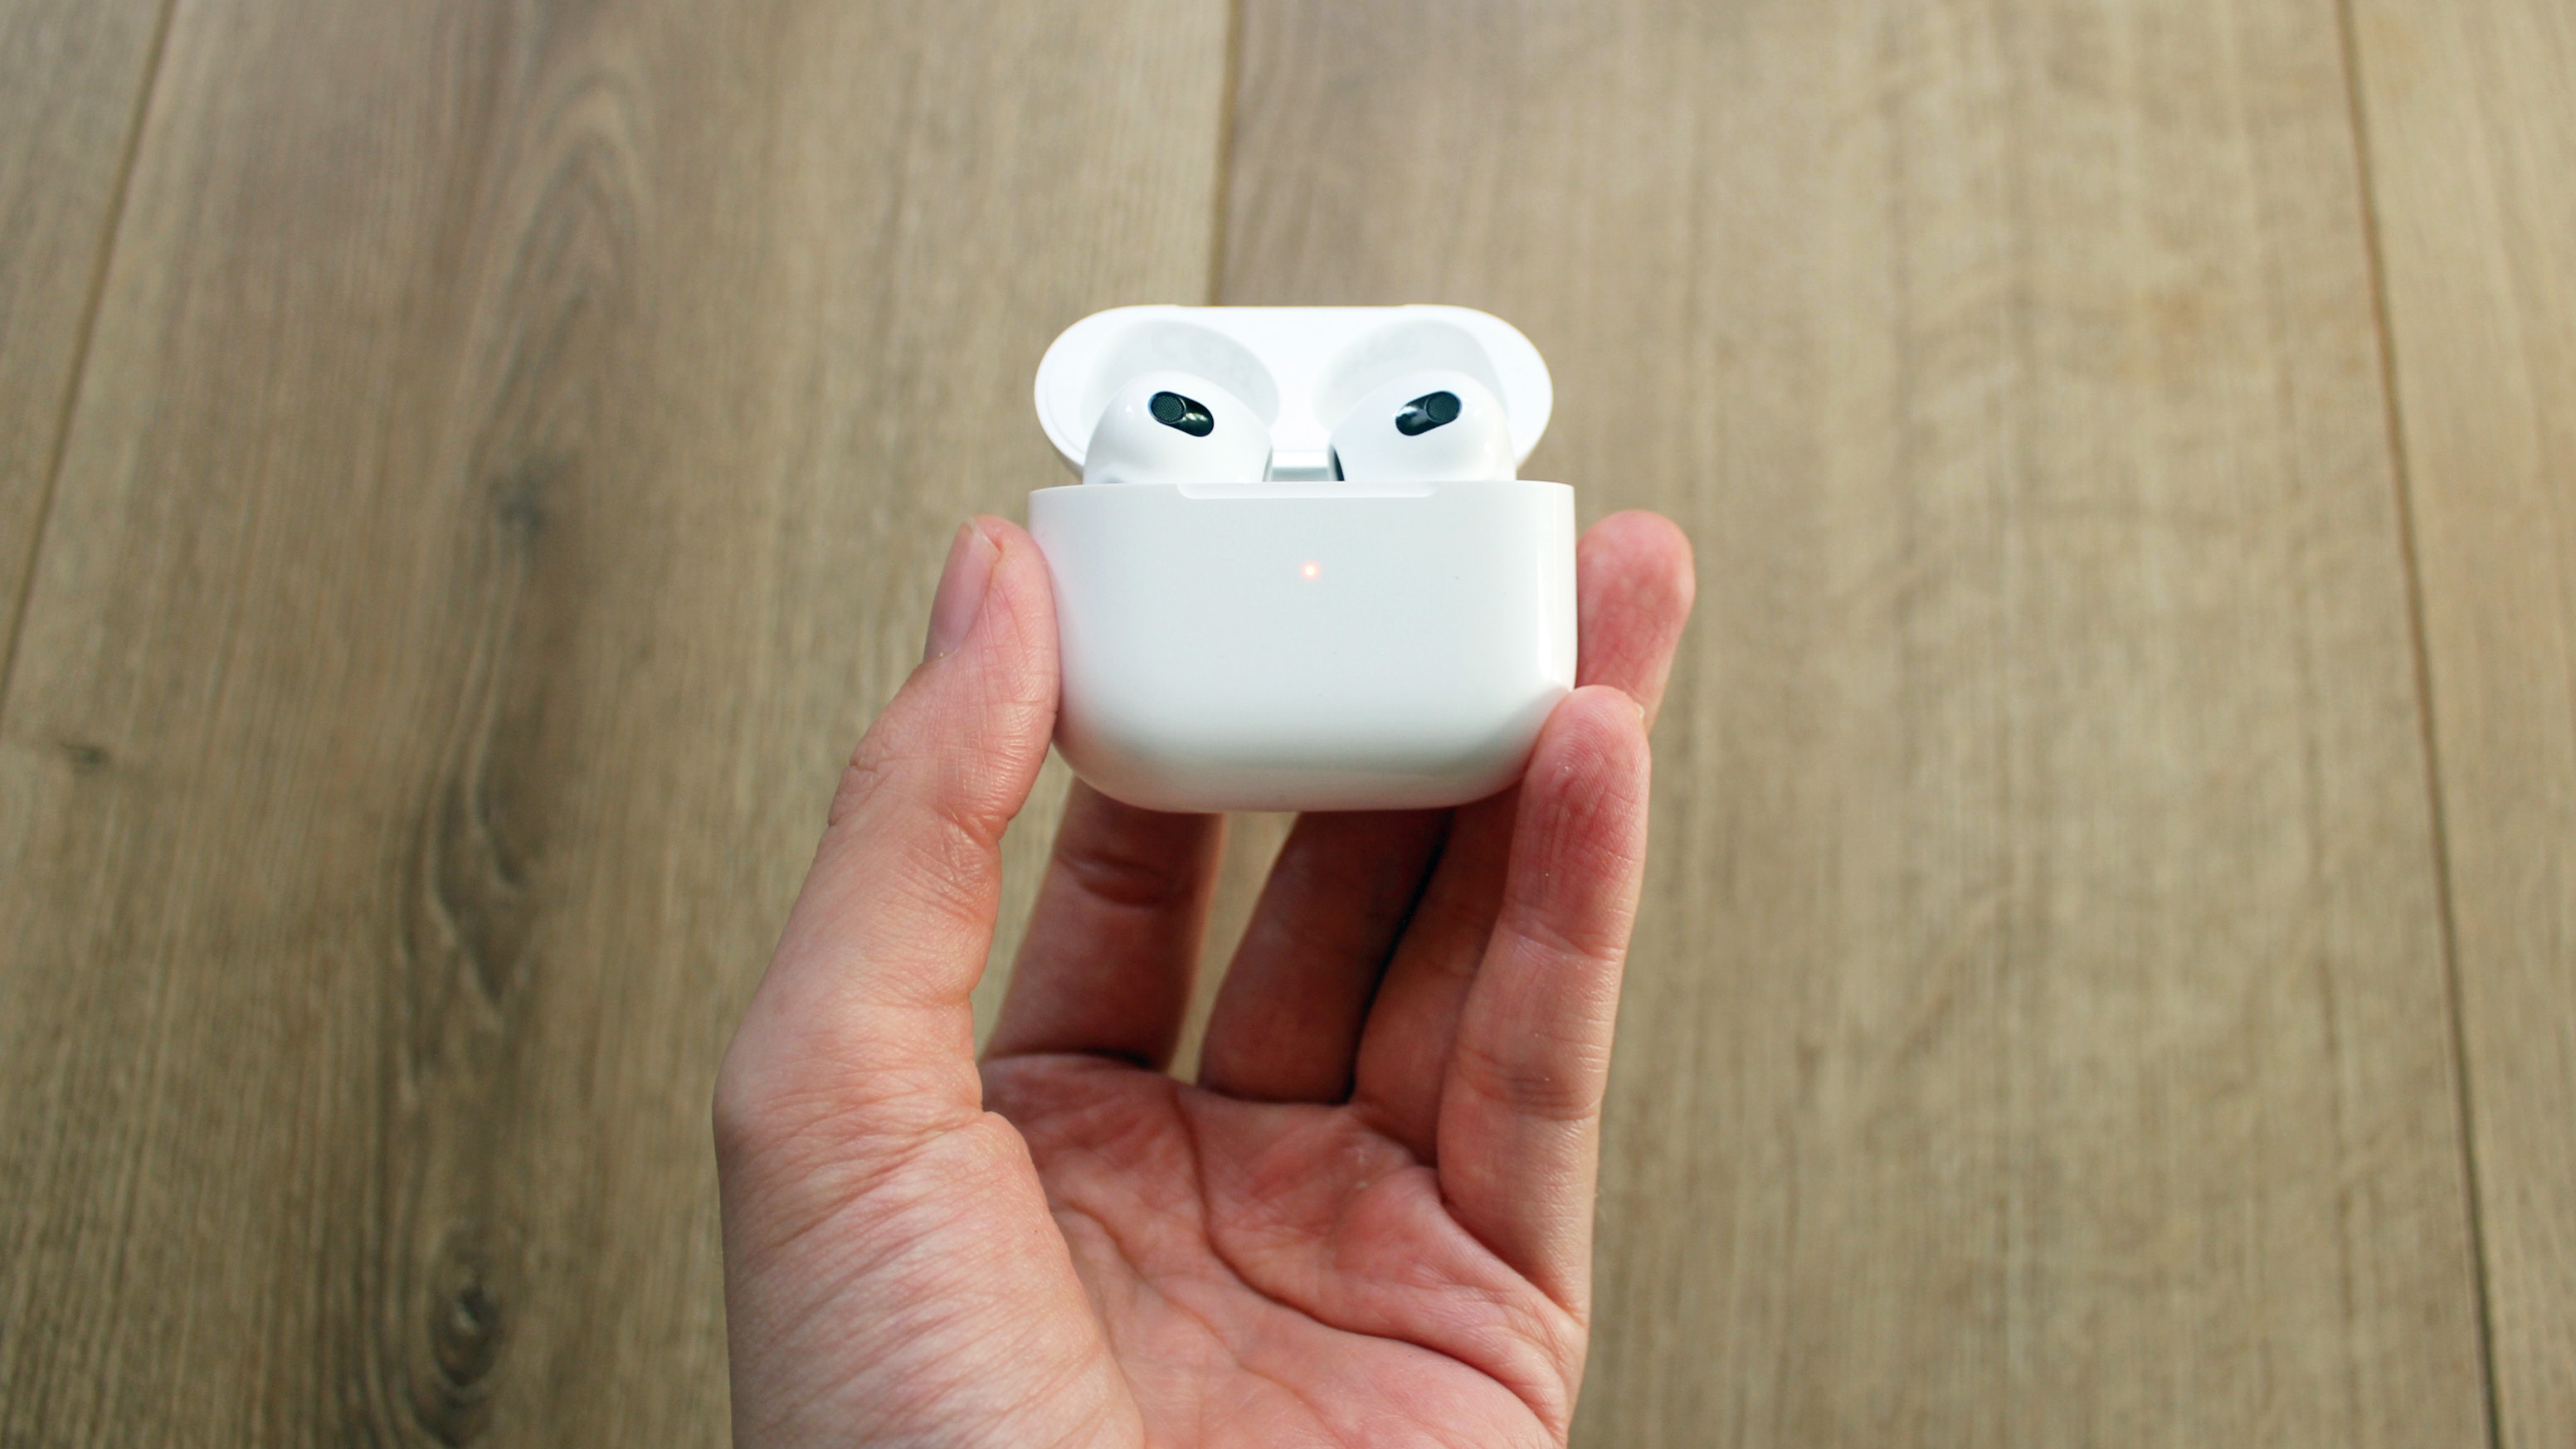 the apple airpods 3rd generation in their charging case